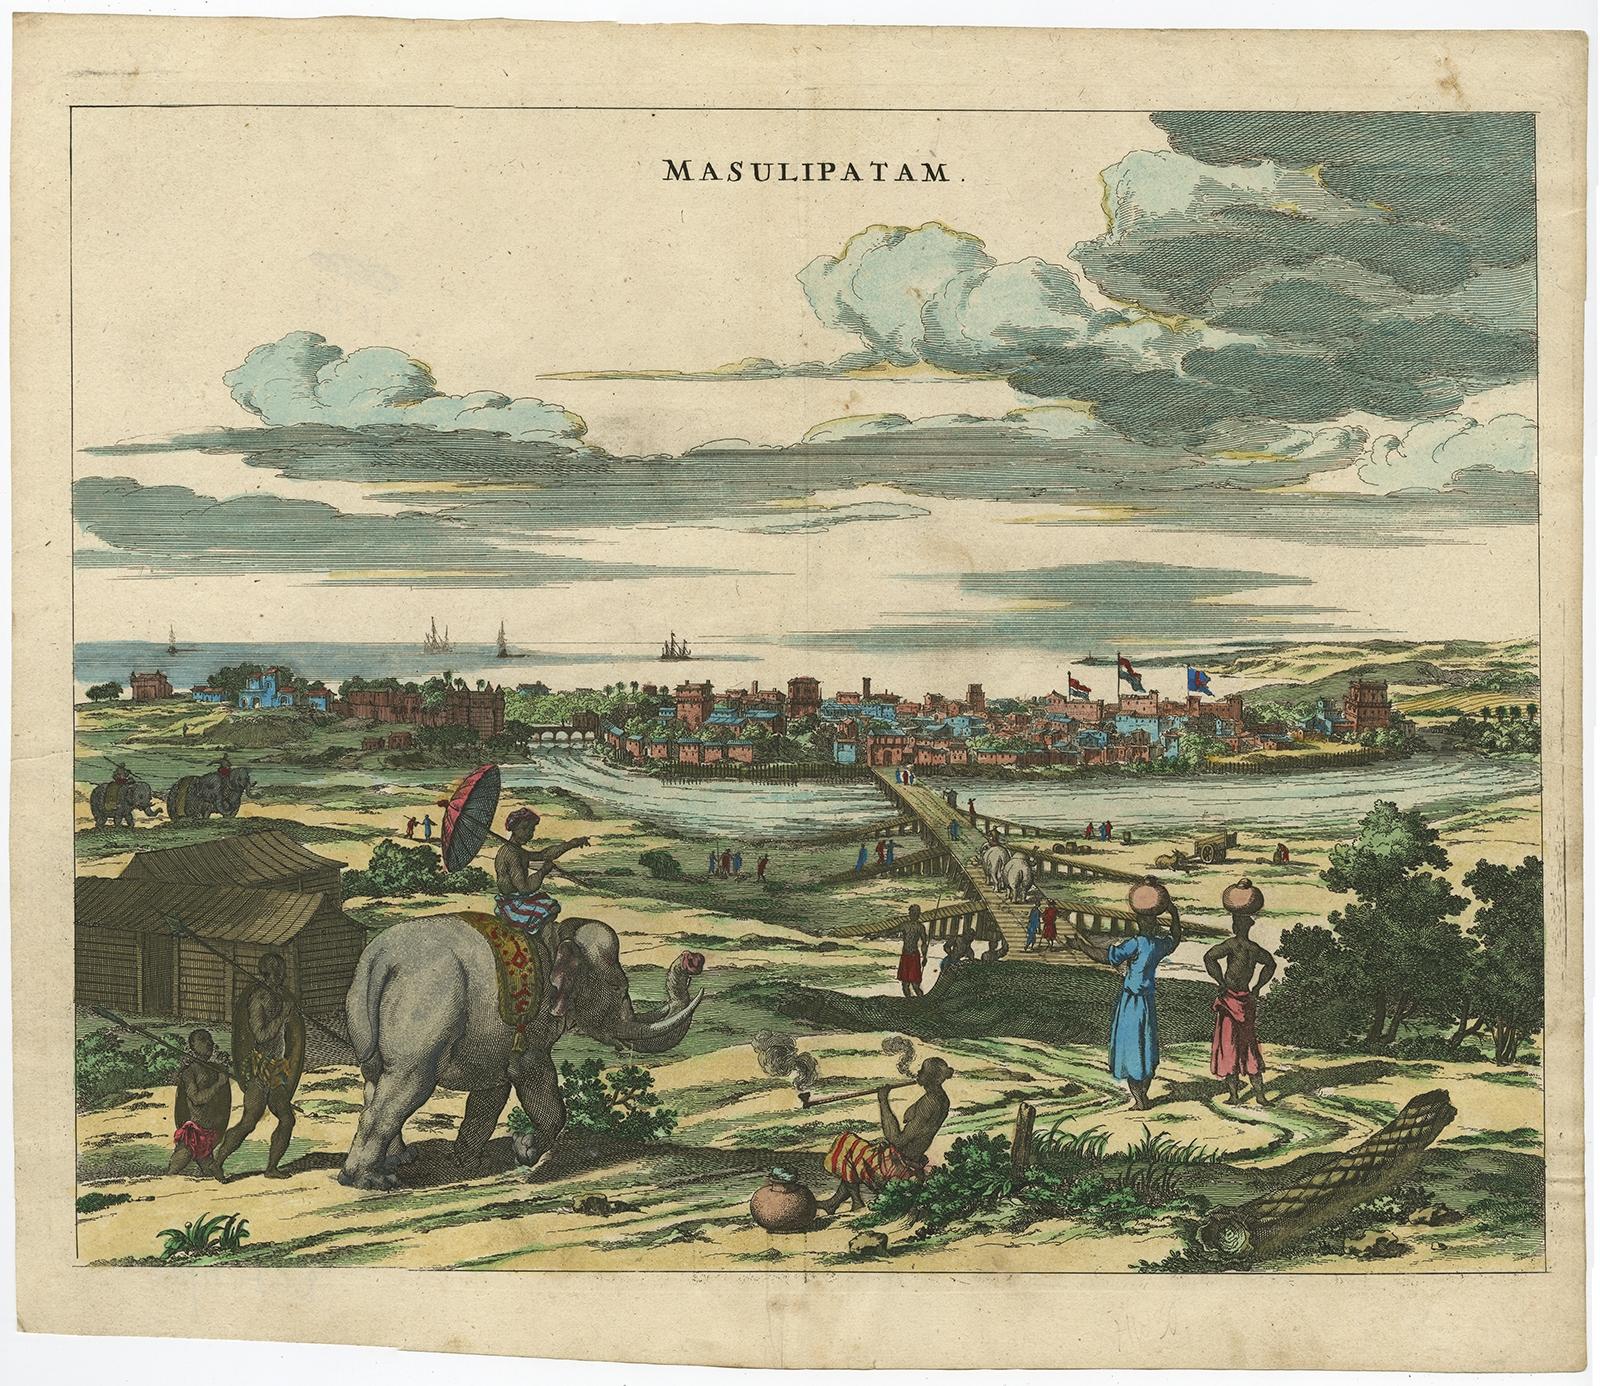 Antique print titled 'Masulipatam'. 

Original antique print showing a view of Masulipatam, India, with an elephant on foreground. This original engraving originates from the 1672 edition of Baldaeus' 'Nauwkeurige beschrijving Malabar en